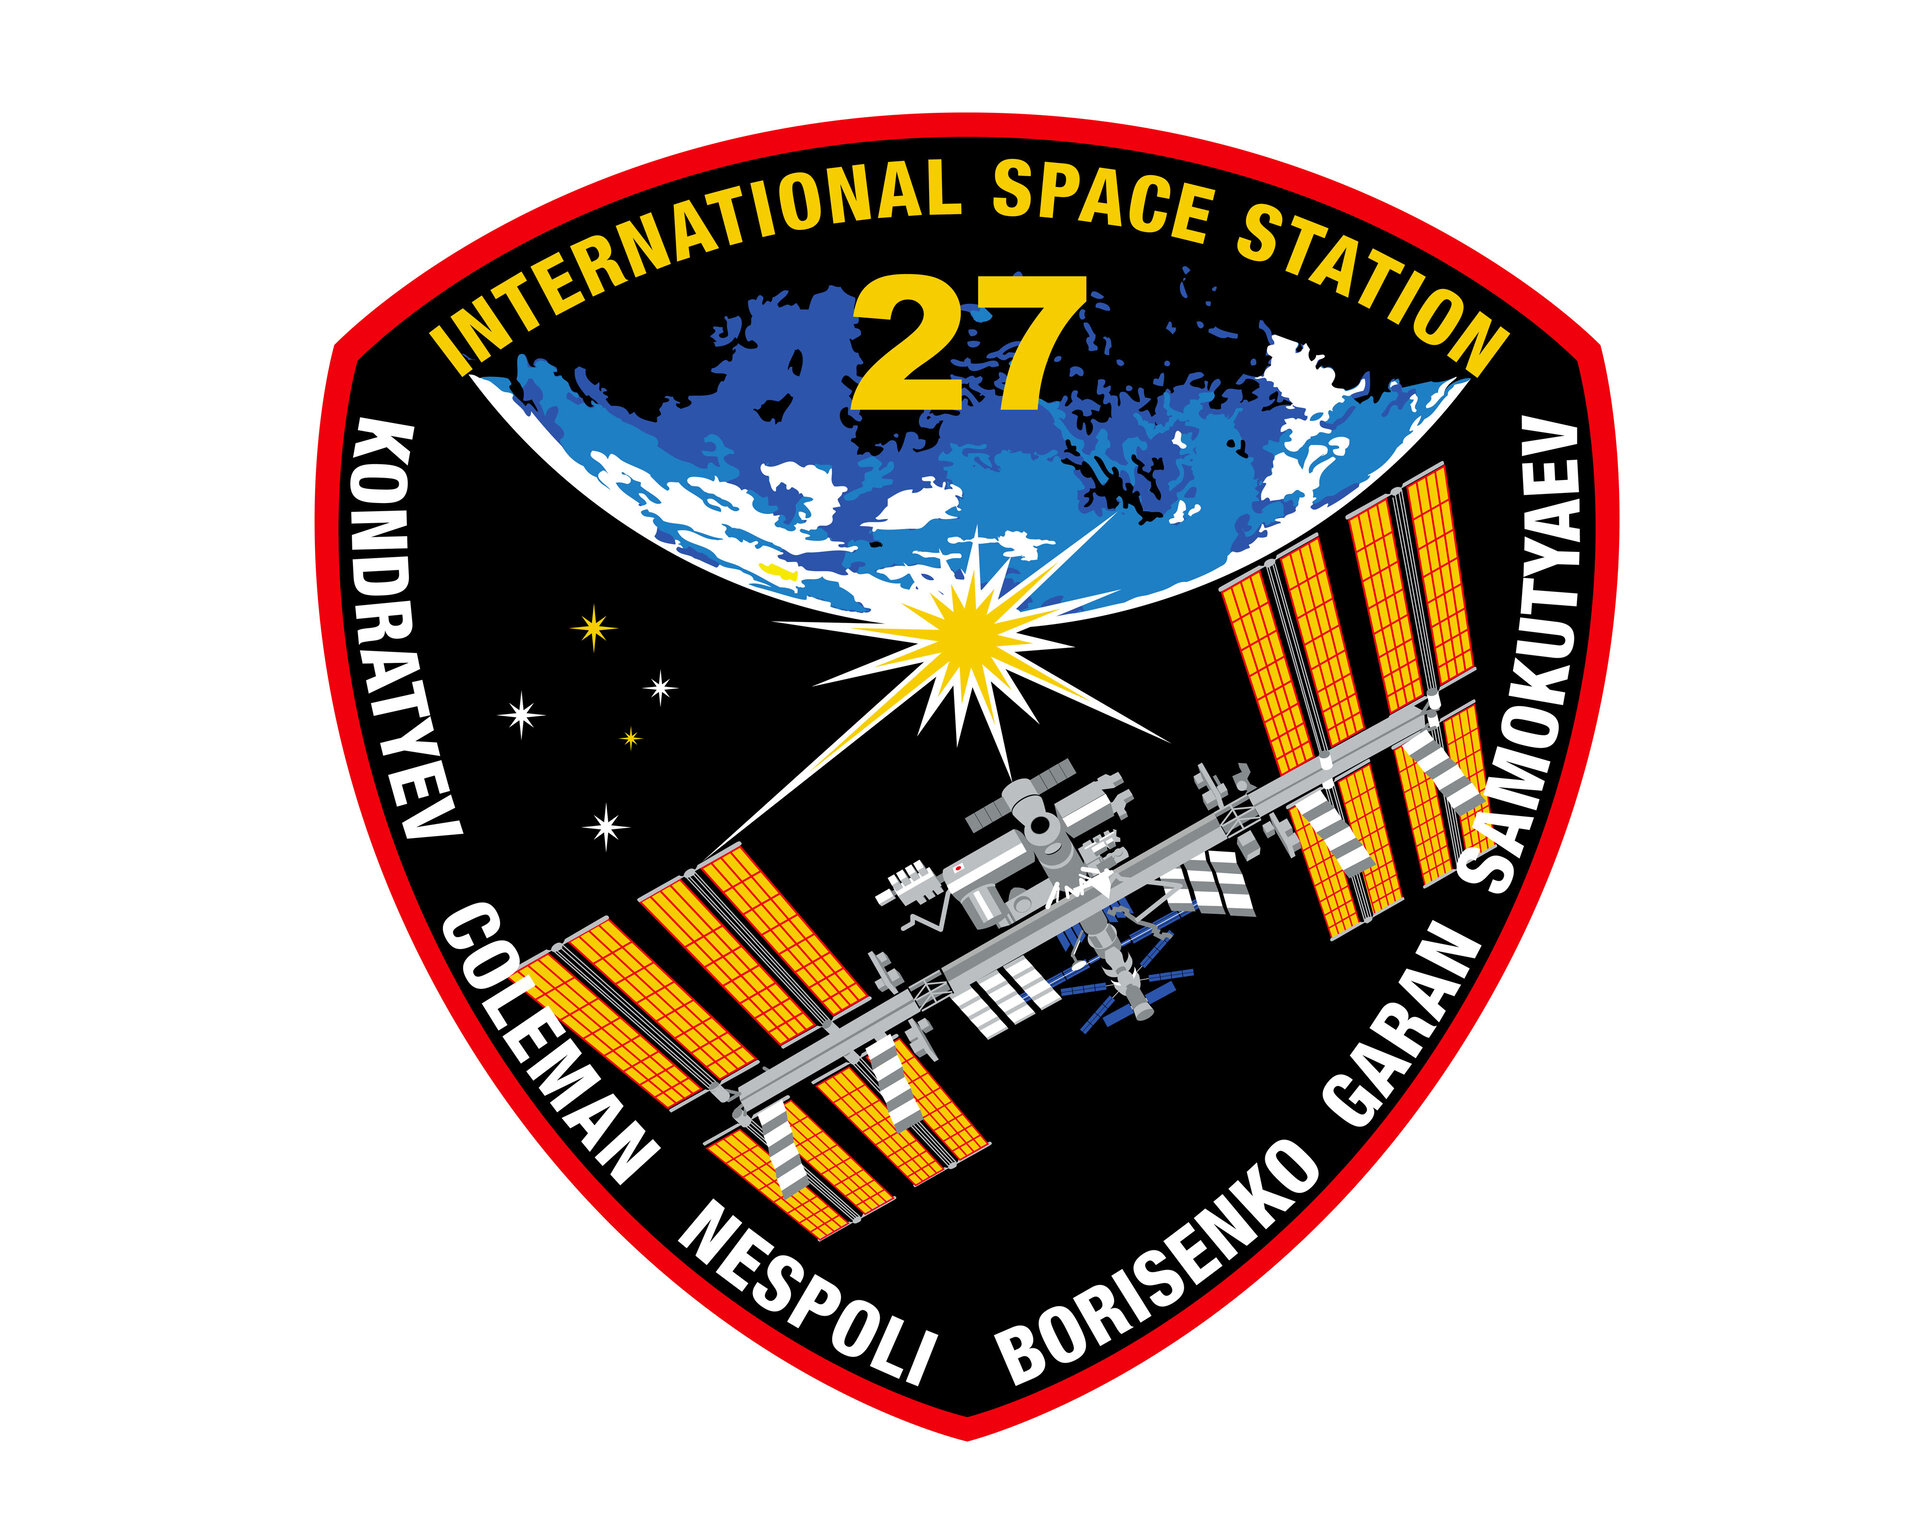 ISS Expedition 27 patch, 2011